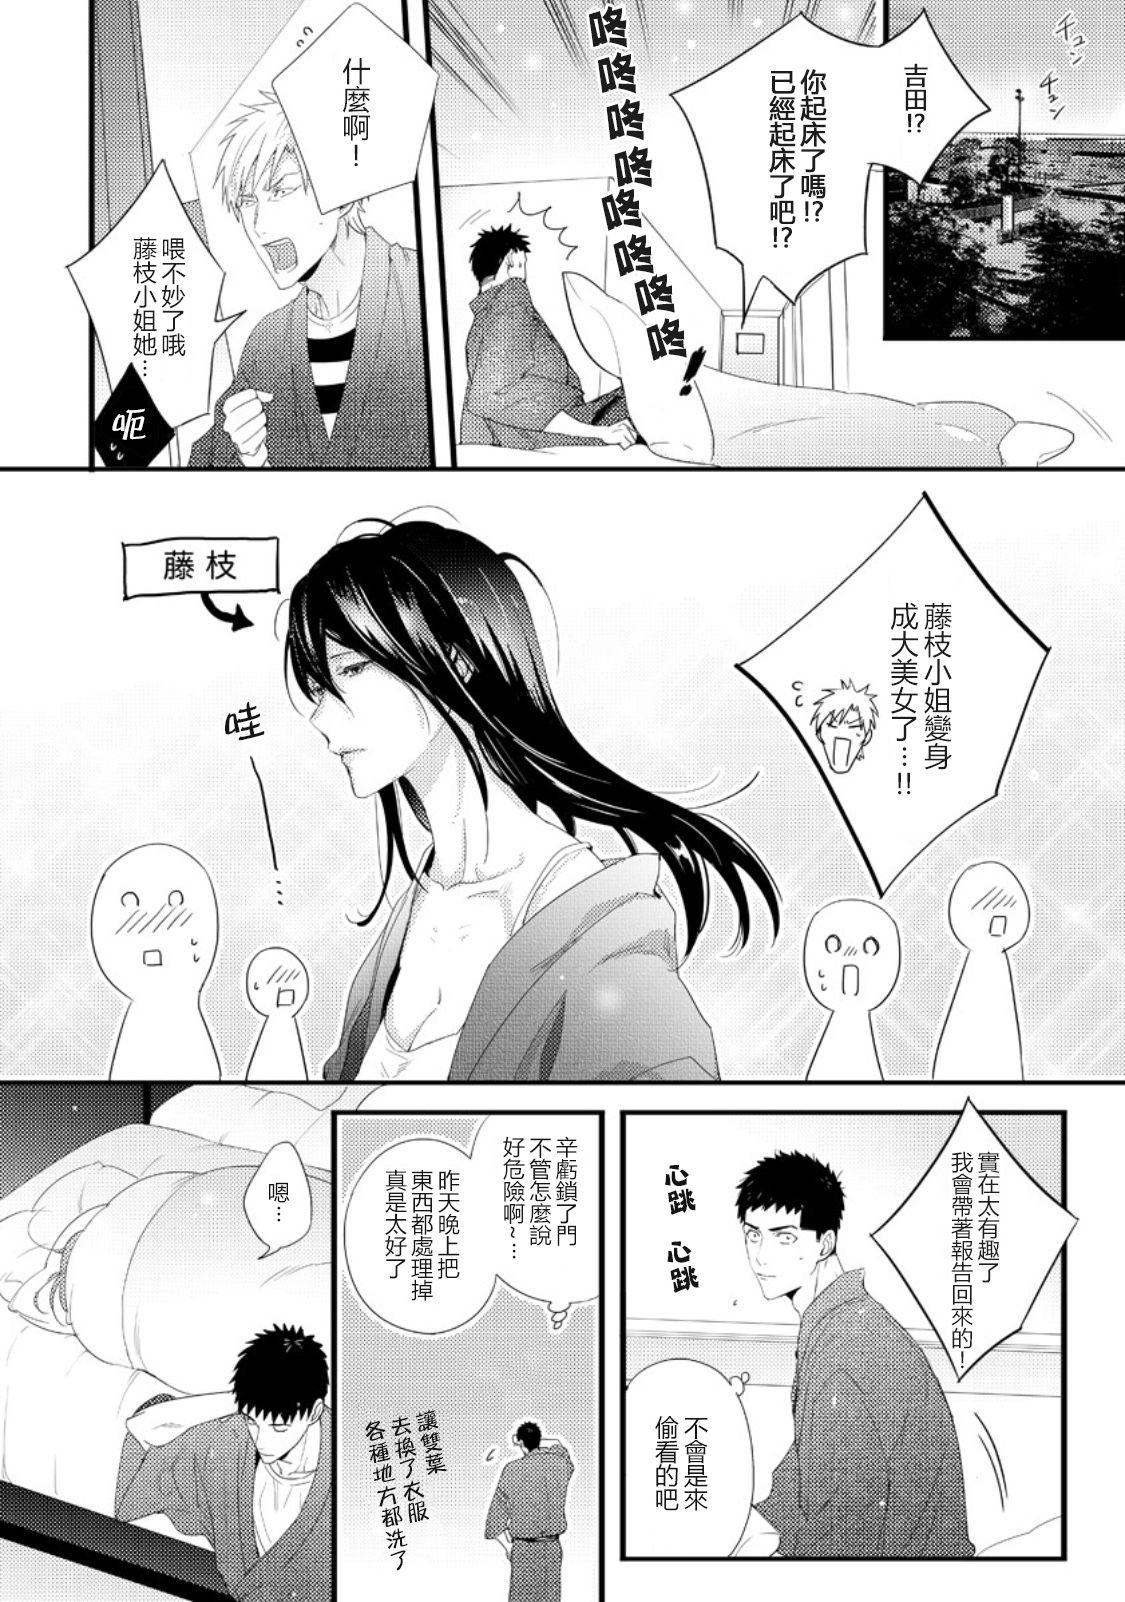 Please Let Me Hold You Futaba-San! Ch.1 23